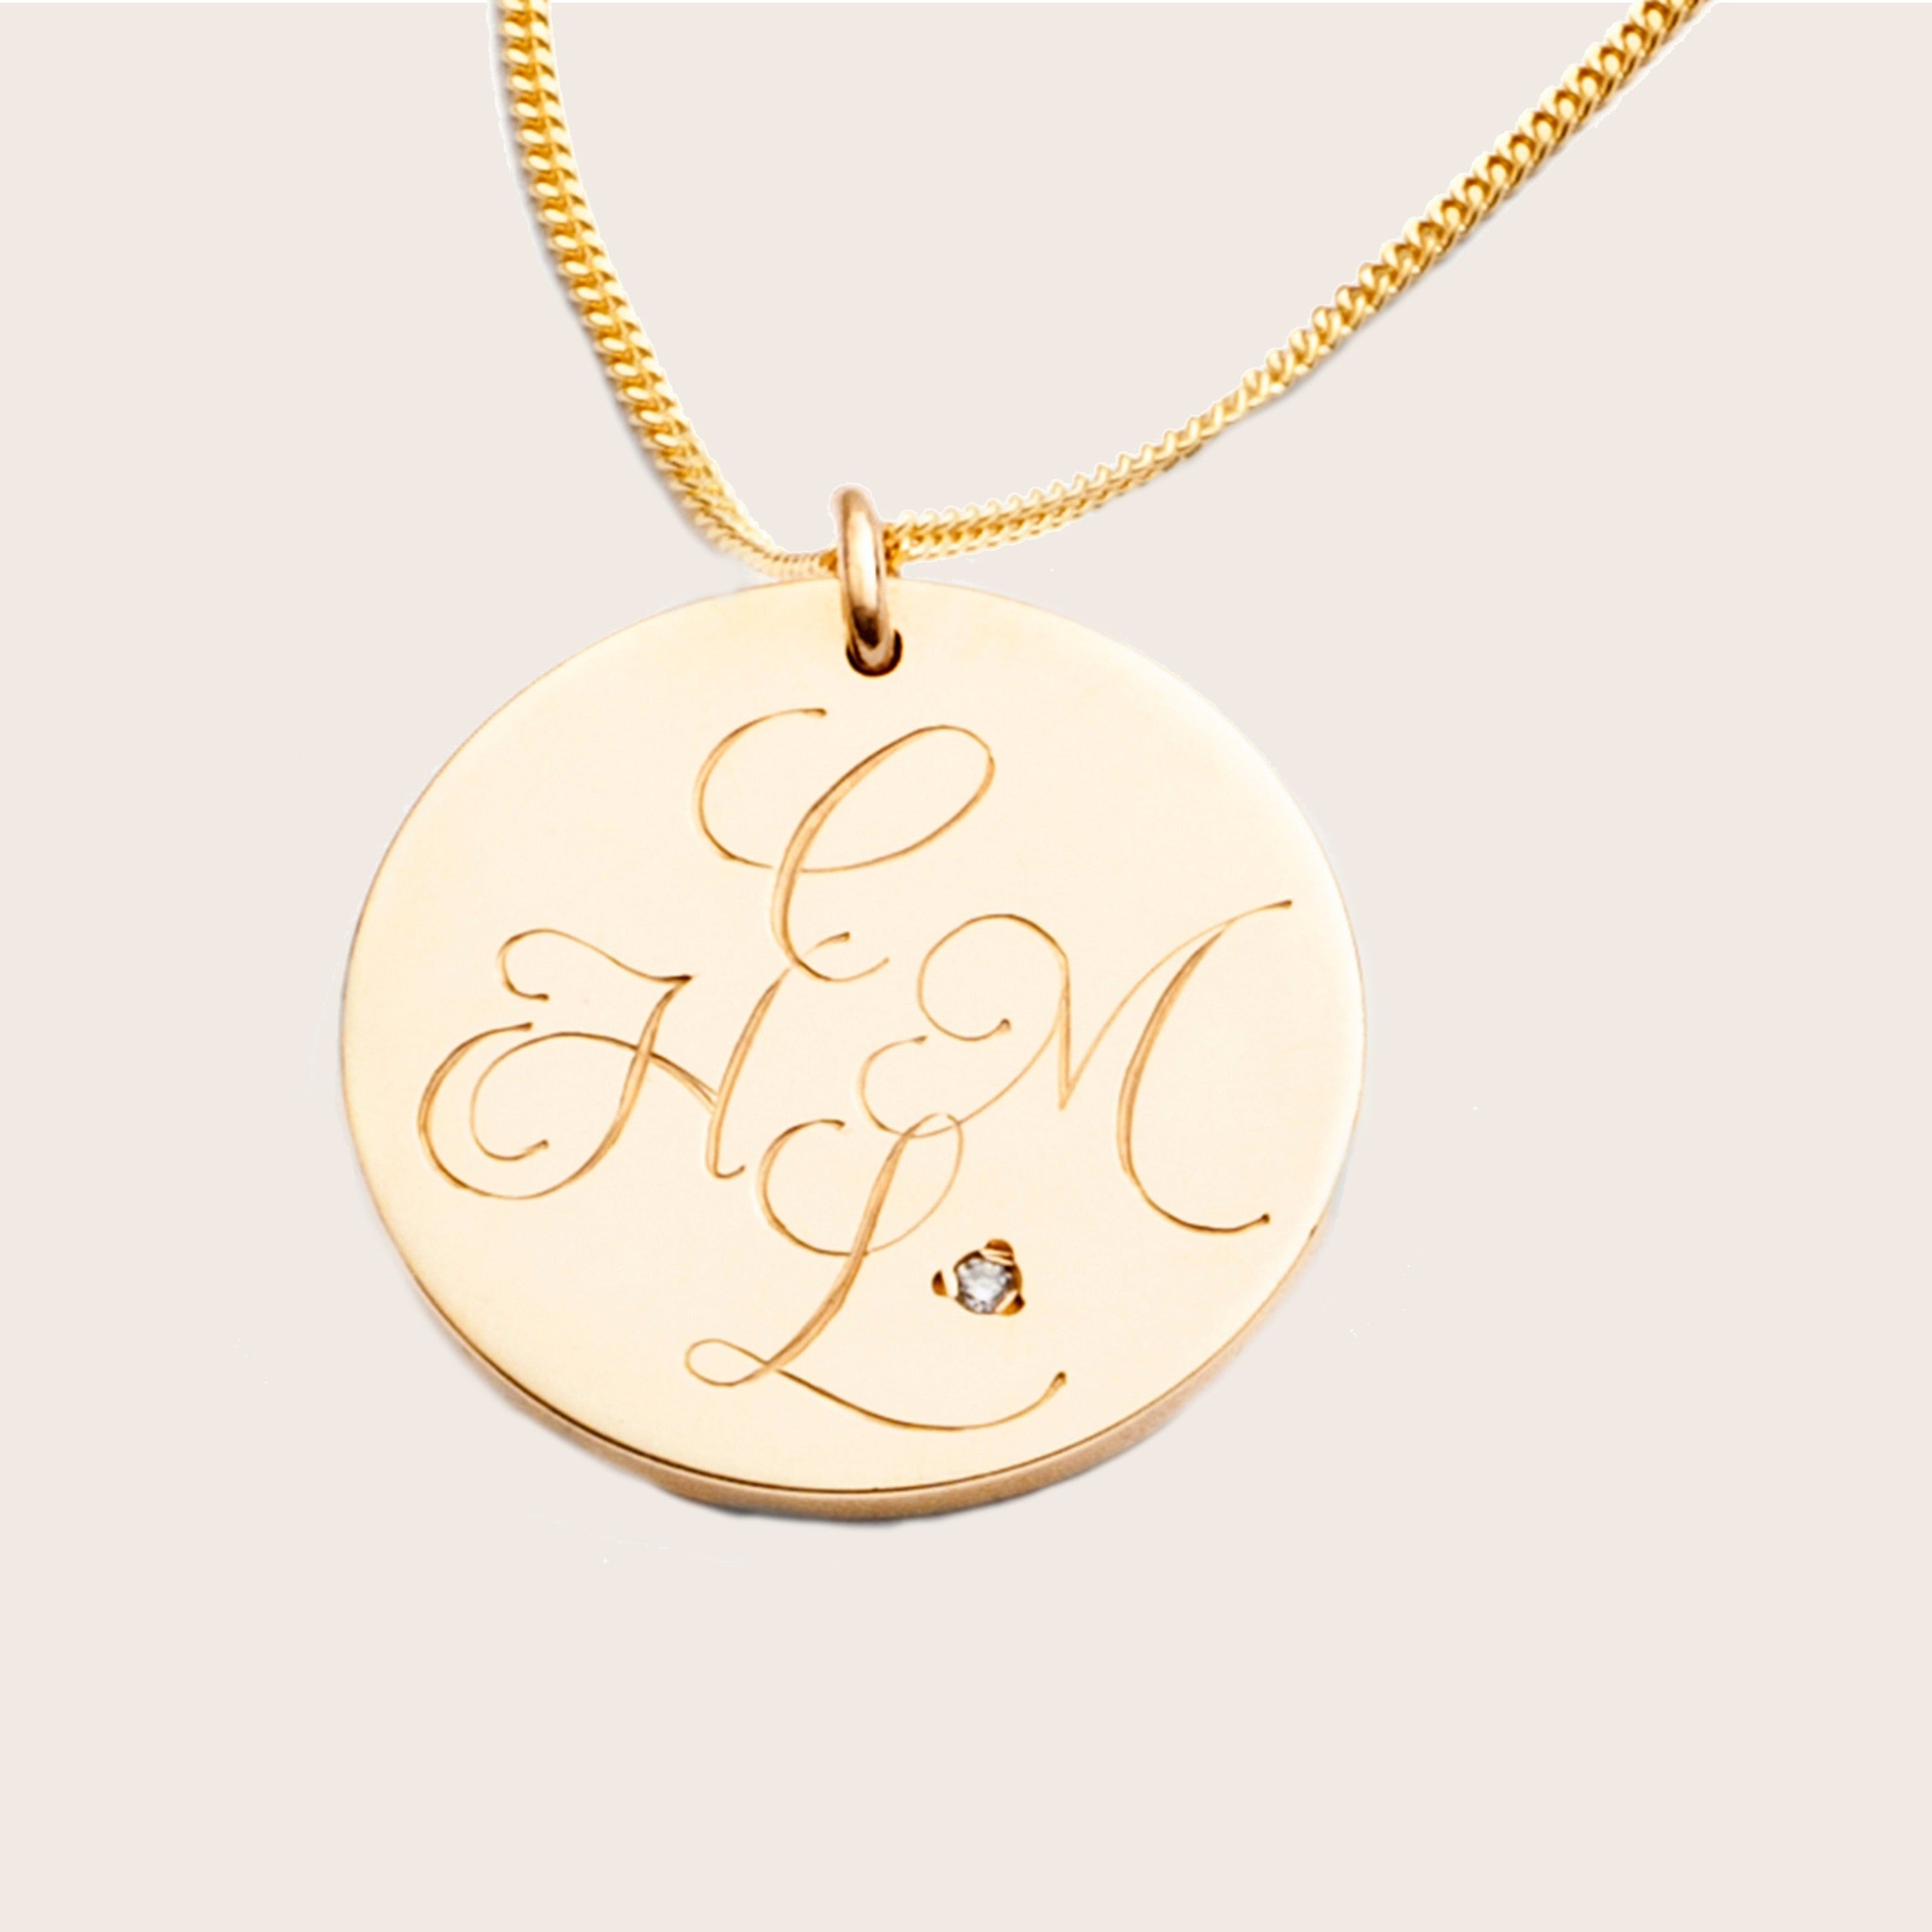 Entwined Initials Disc Pendant Necklace with Diamond - harryrockslondon